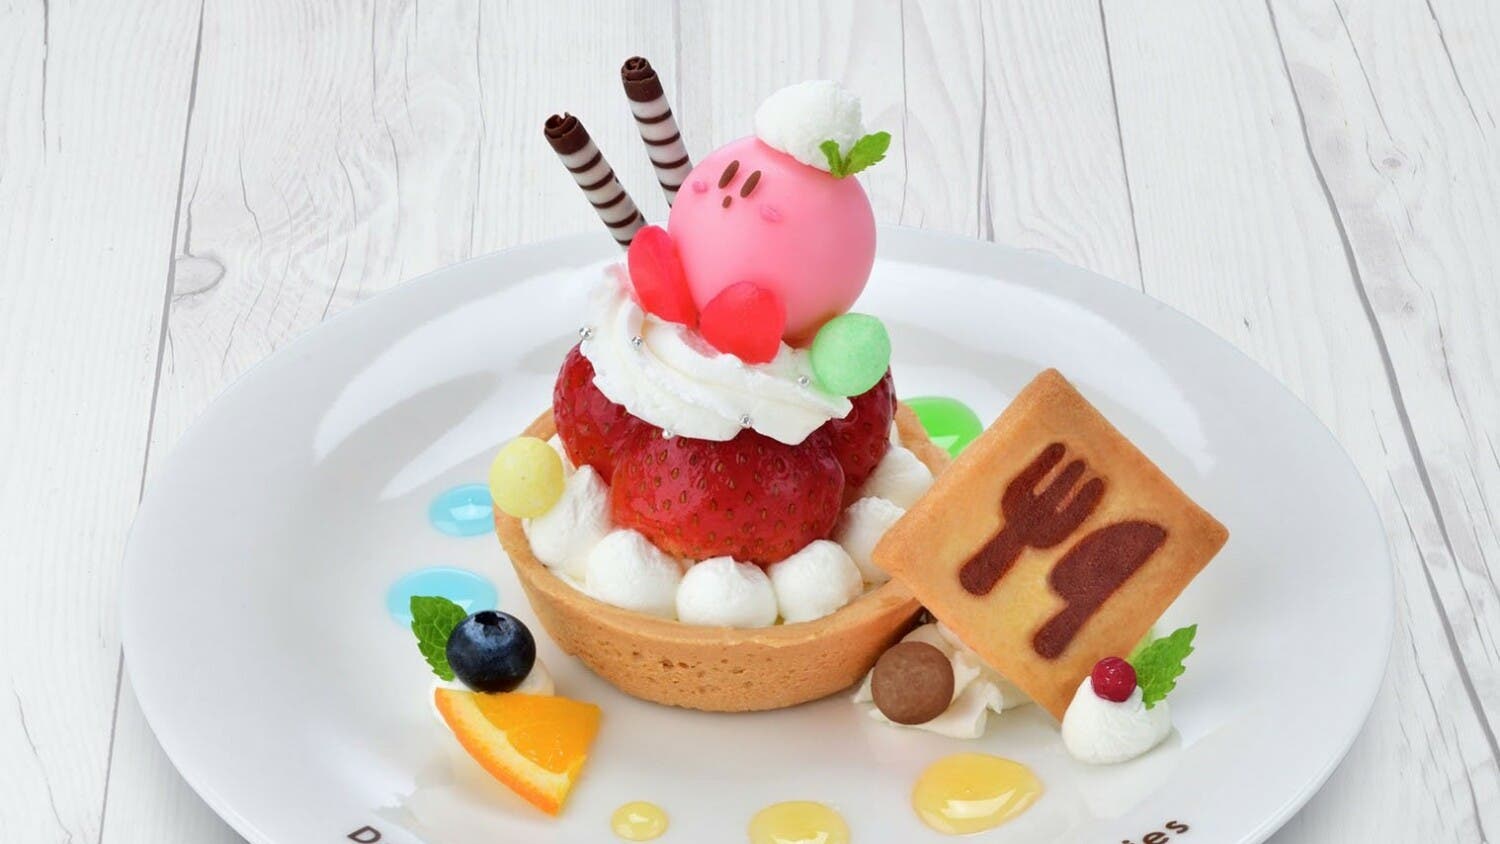 Kirby Café adds this dish inspired by Kirby’s Dream Buffet